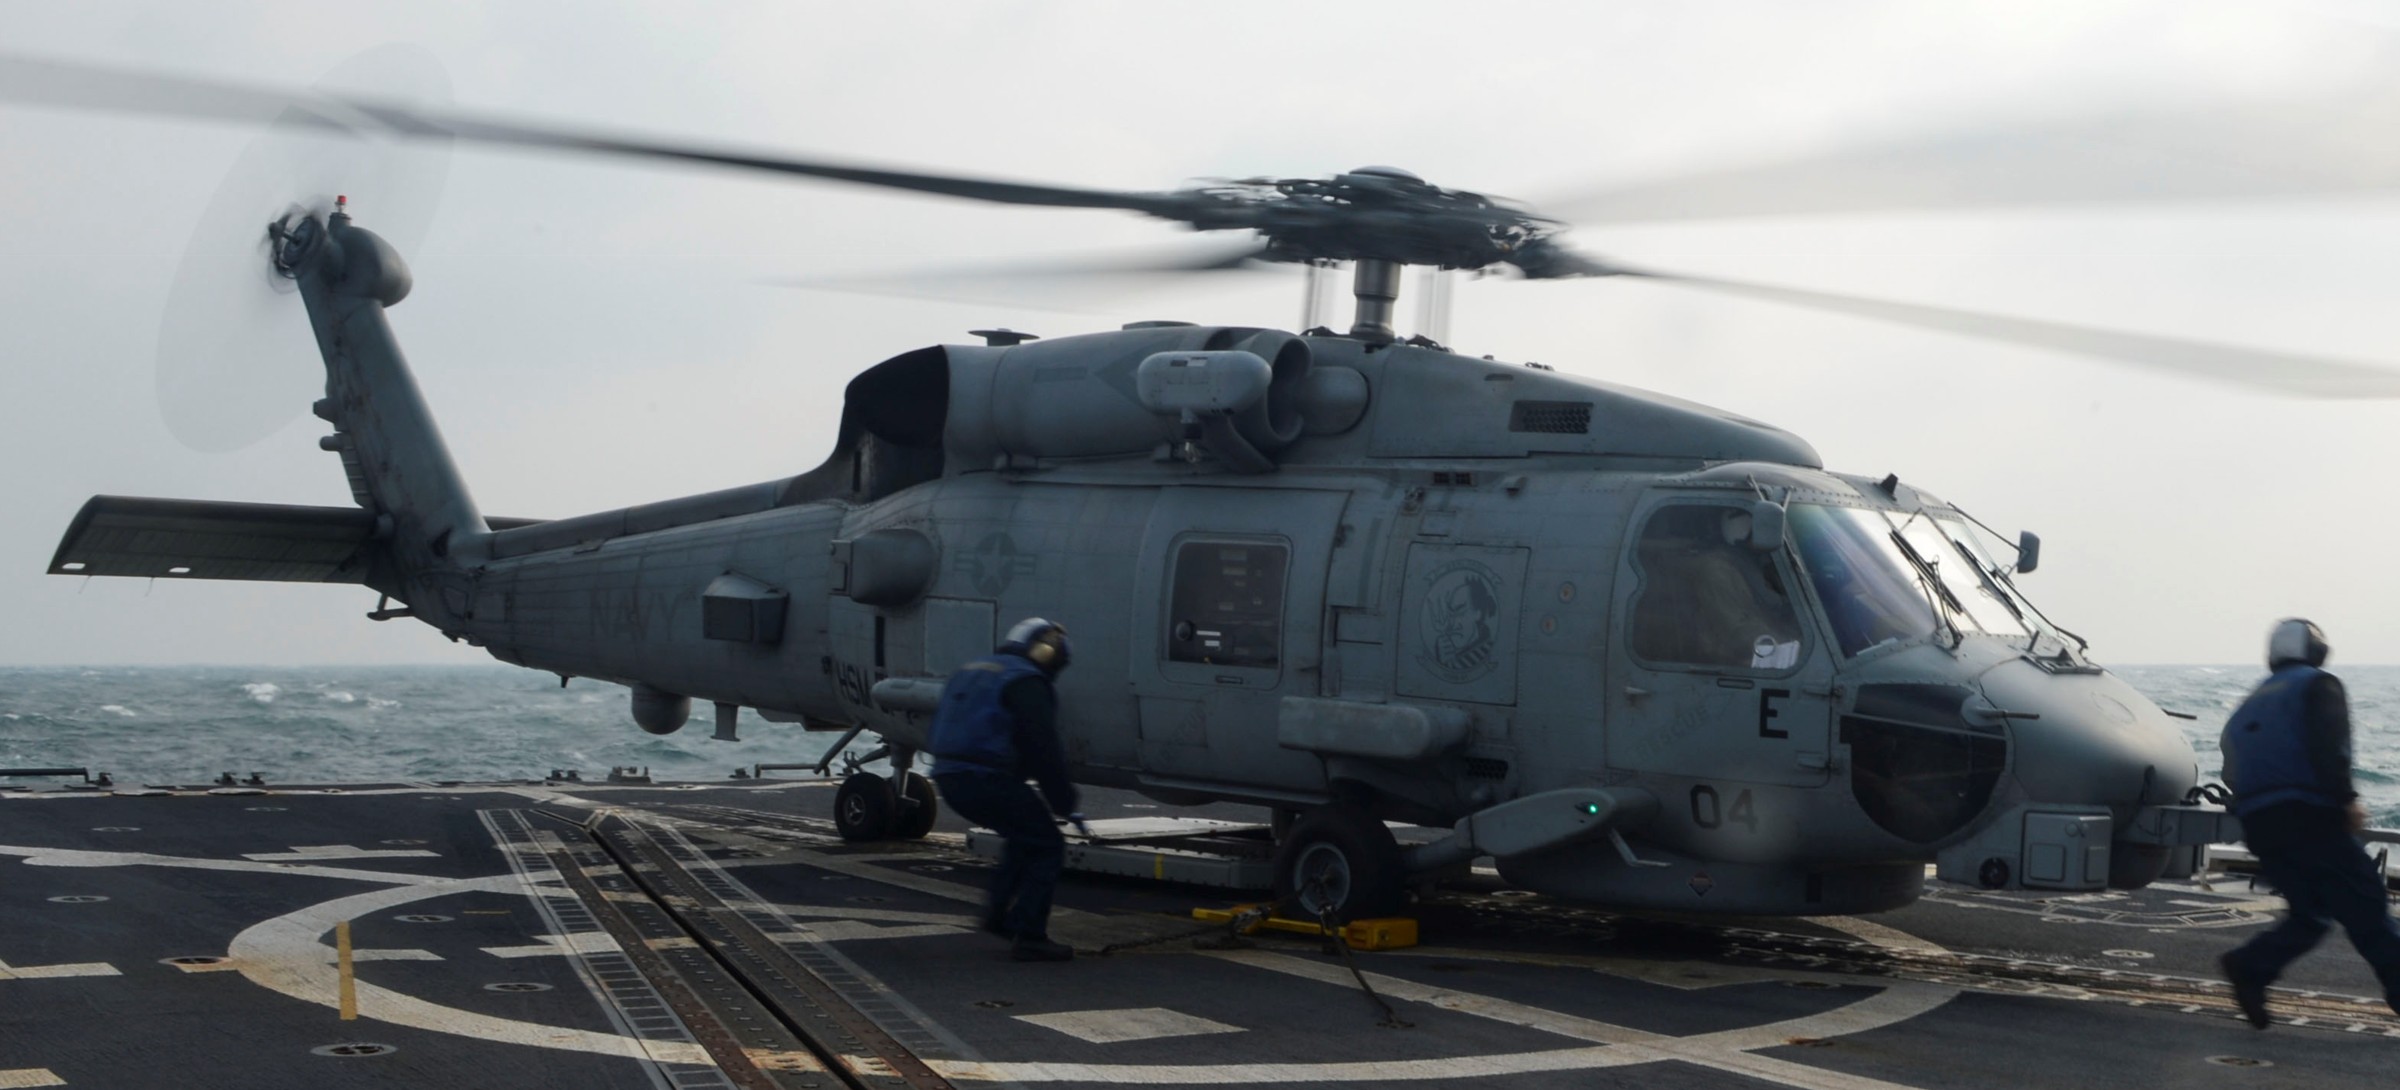 hsm-51 warlords helicopter maritime strike squadron mh-60r seahawk navy 2014 21